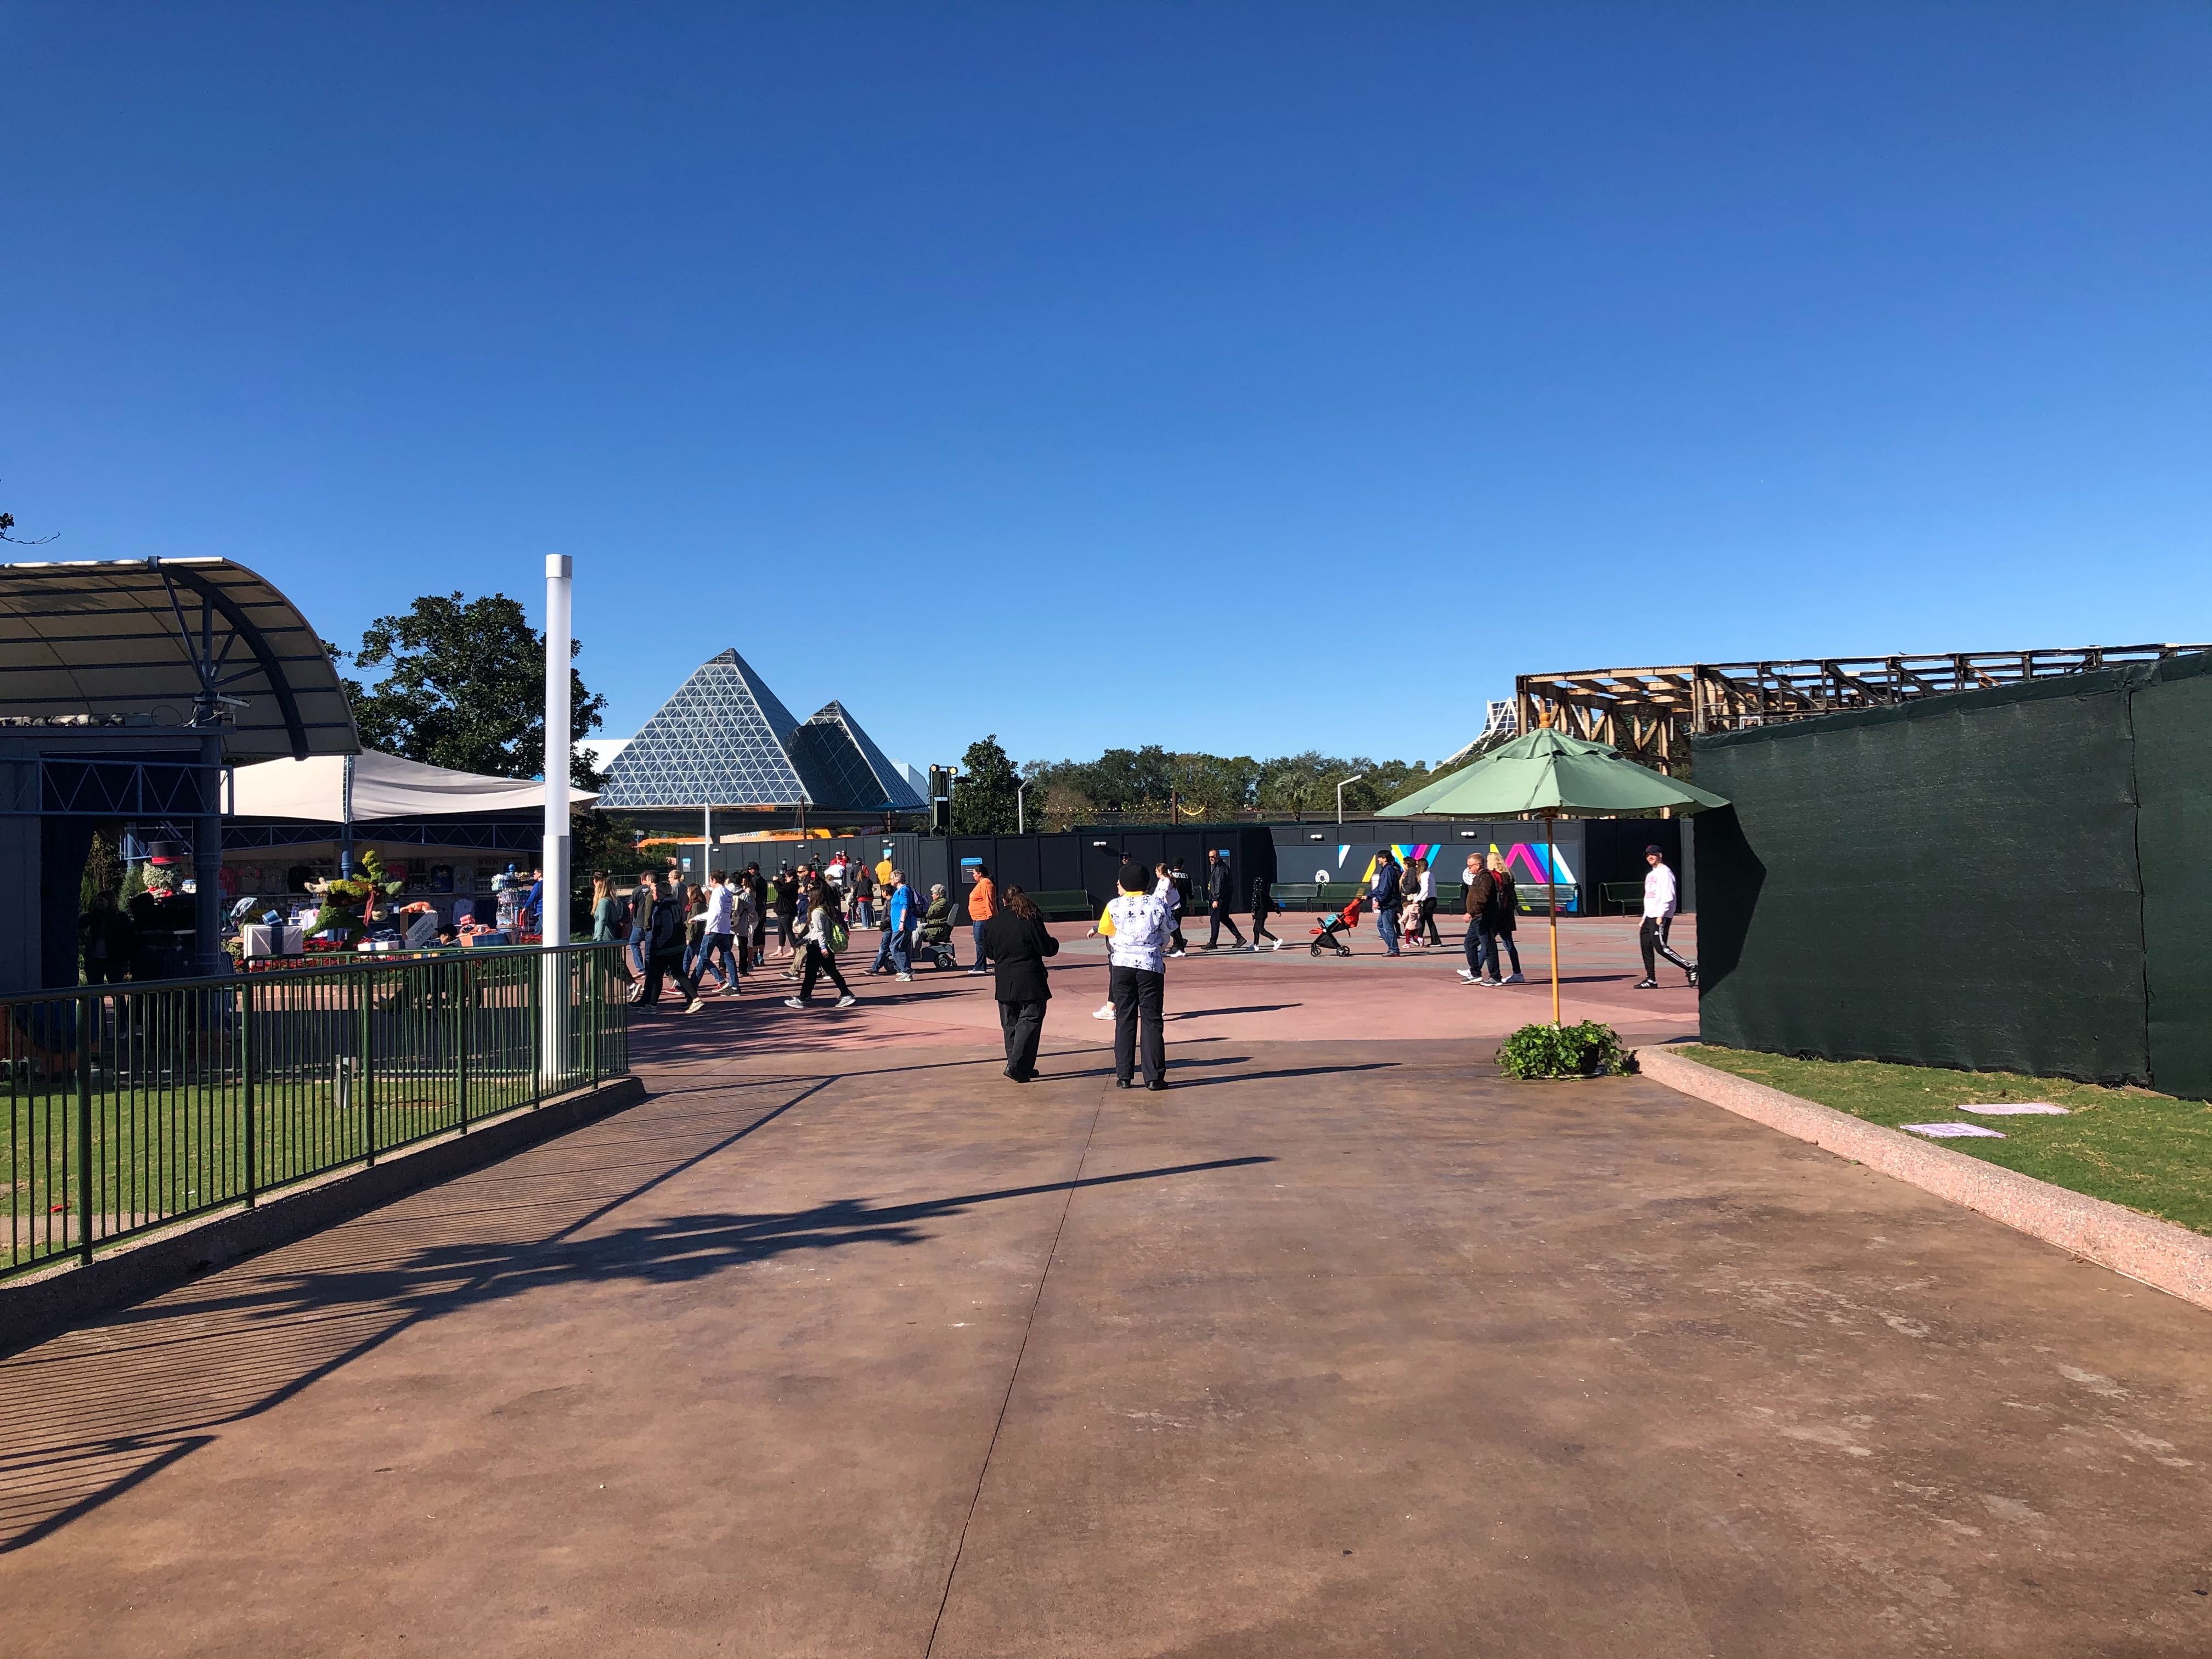 PHOTOS New Pathway Near Innoventions East at EPCOT Partially Open